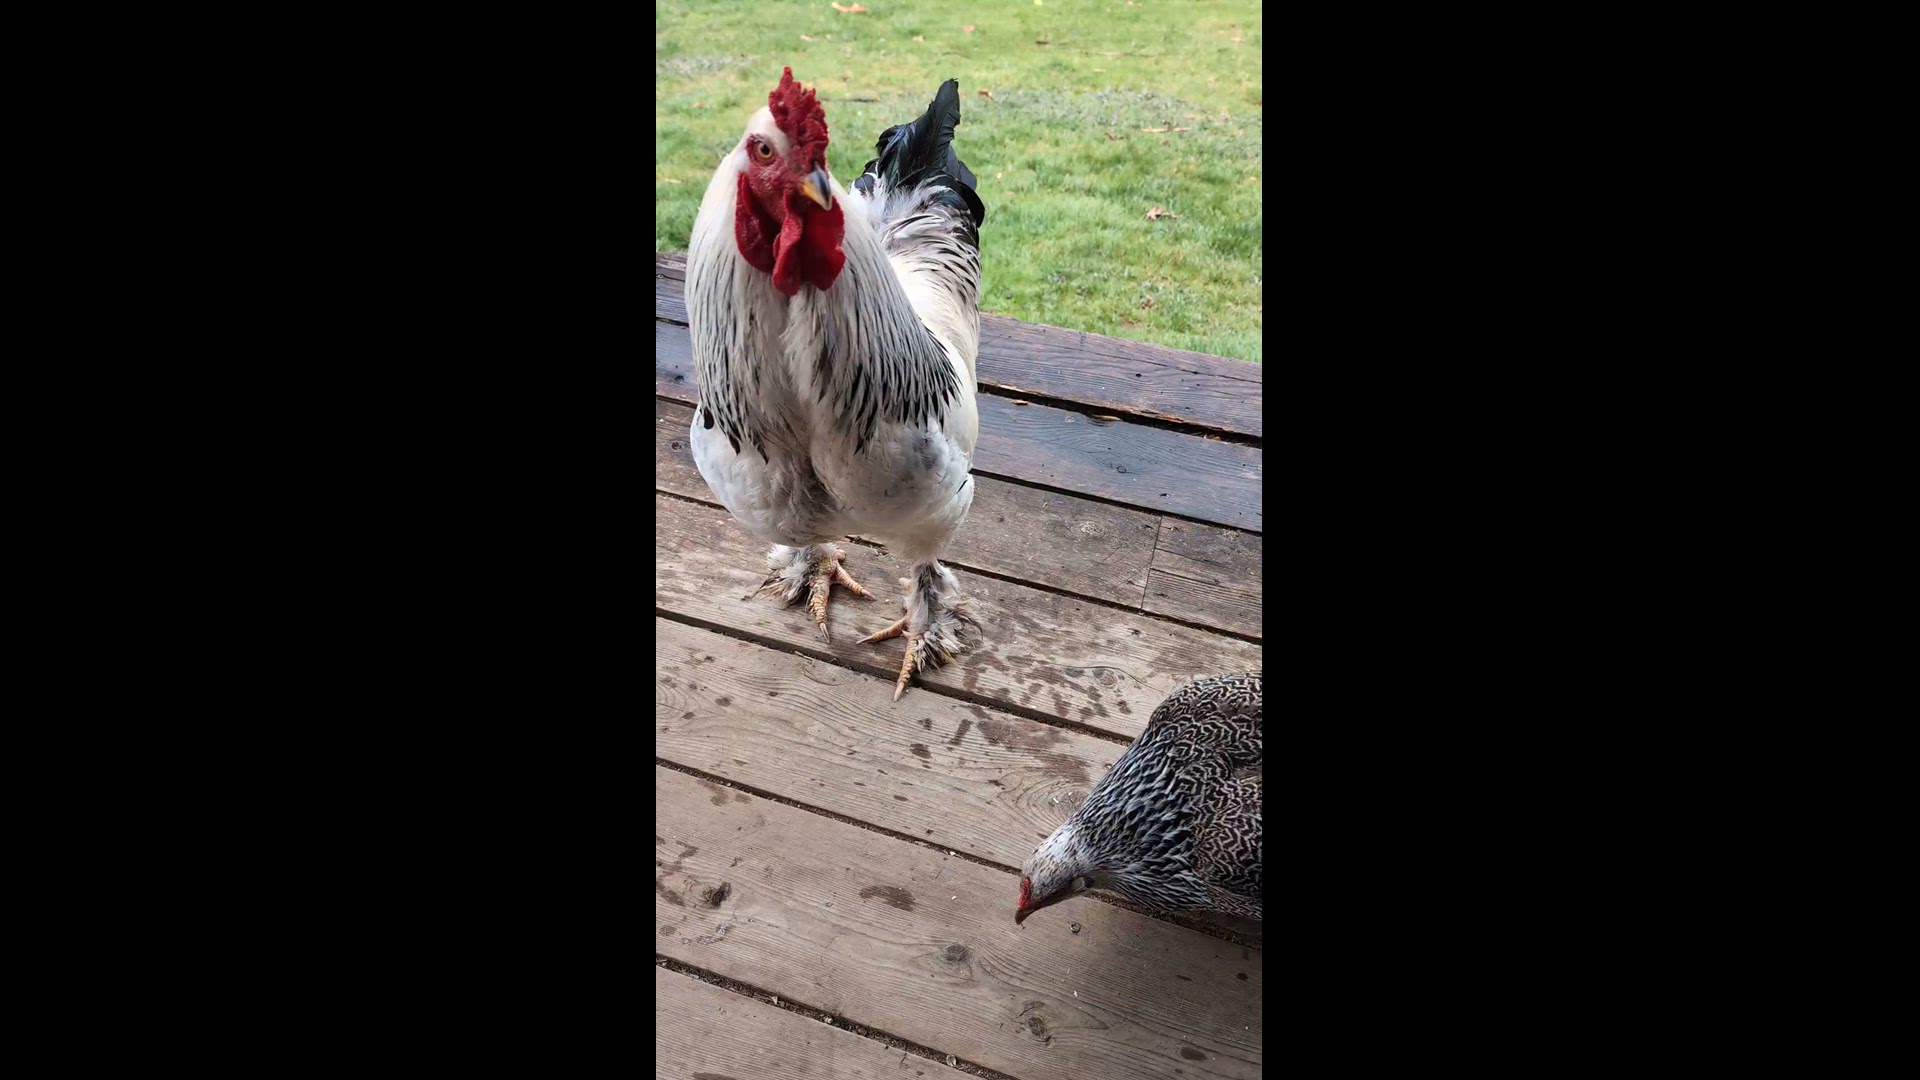 My chickens are too smart.
Credit: Heidi Varle